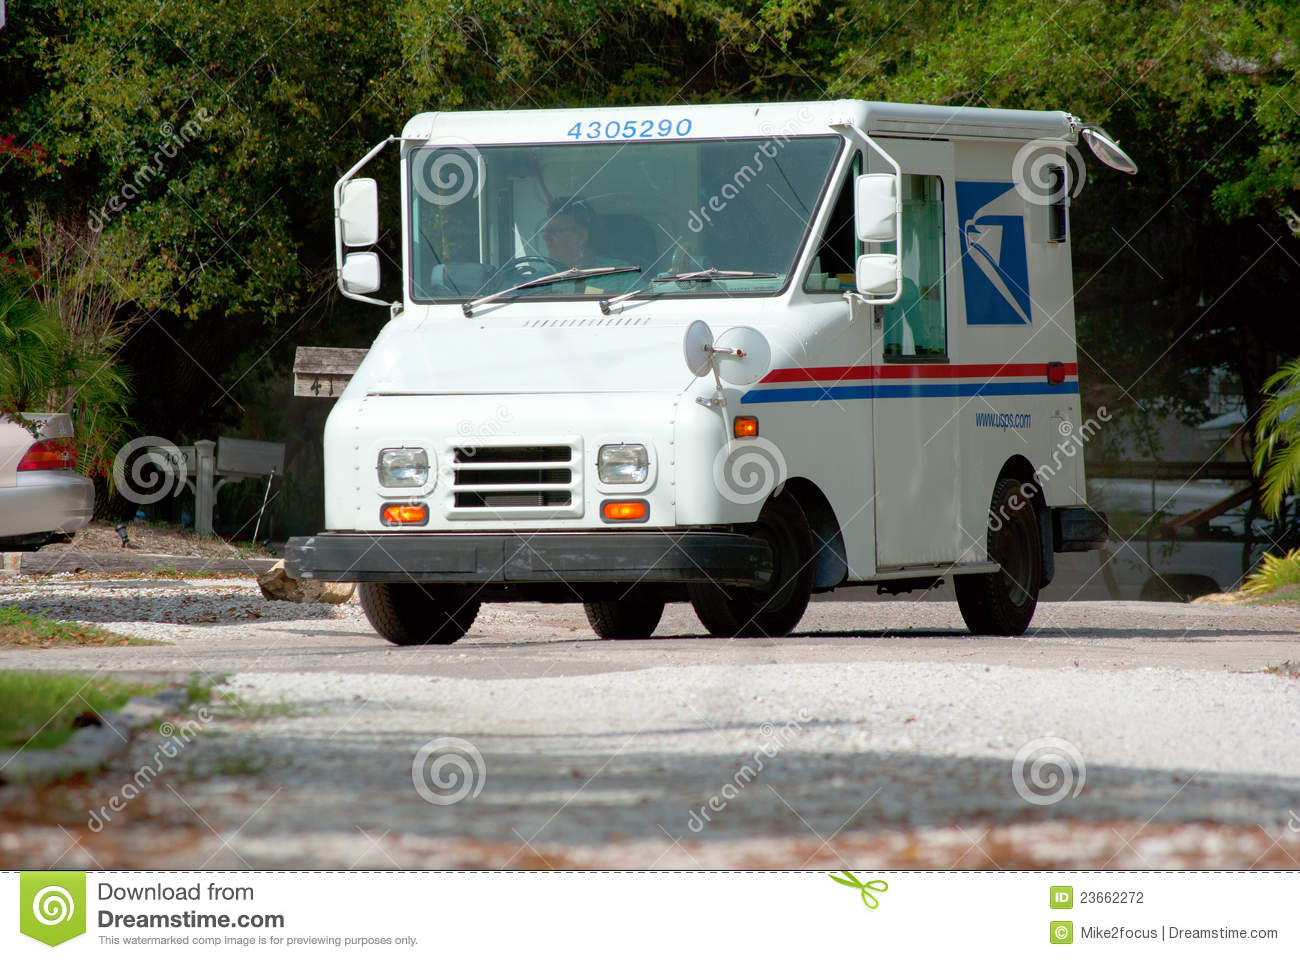 United States Postal Service Truck Van Editorial Photography   Image